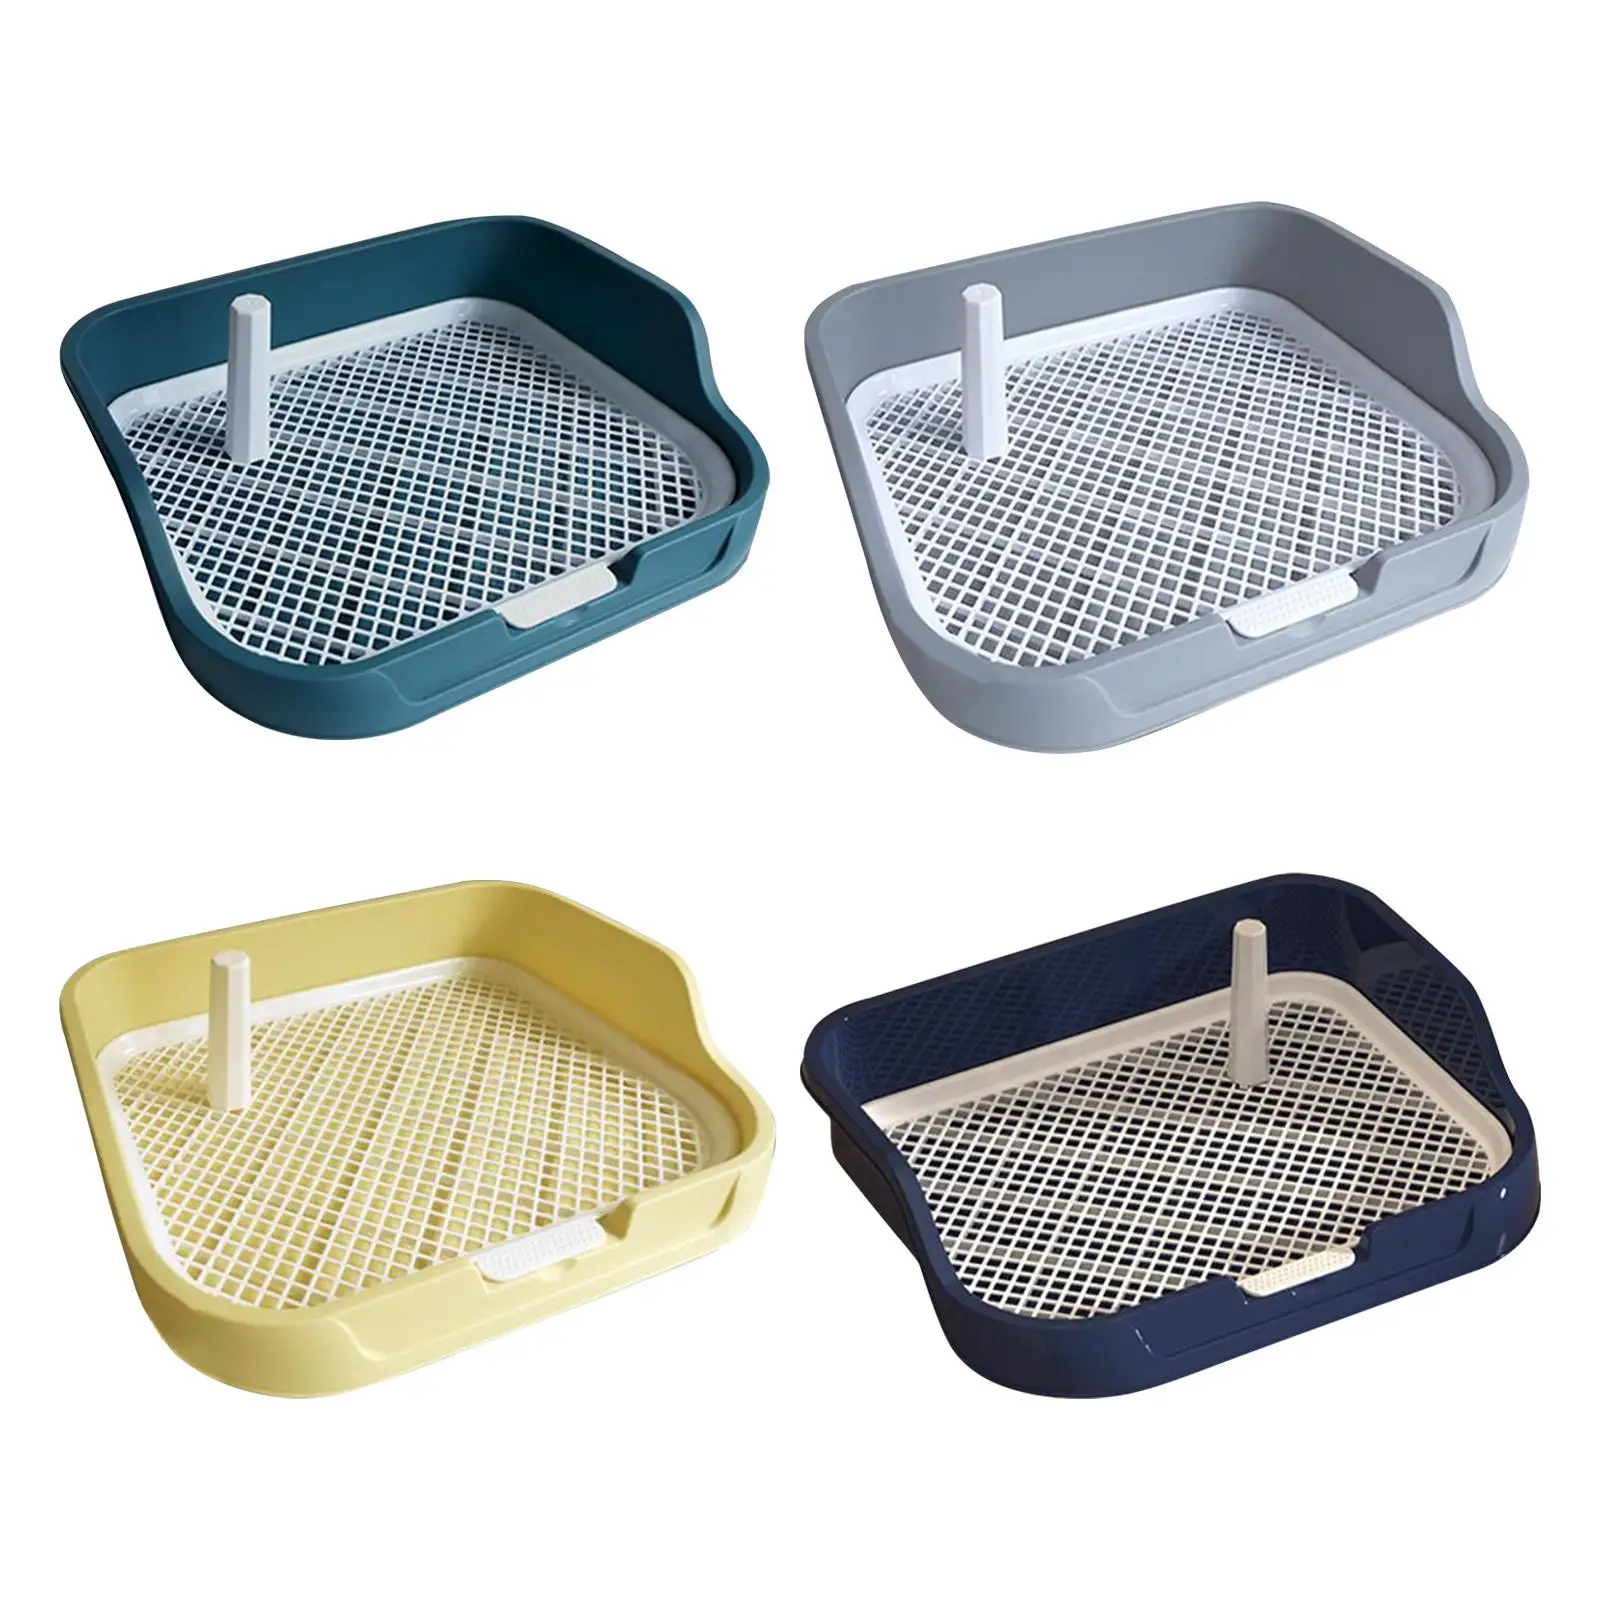 Mesh Grids Toilet Indoor Open Top Entry Dog Litter Pan Pet Training Pad Holder Dog Toilet for Cats Puppy Indoor Bunny Porch